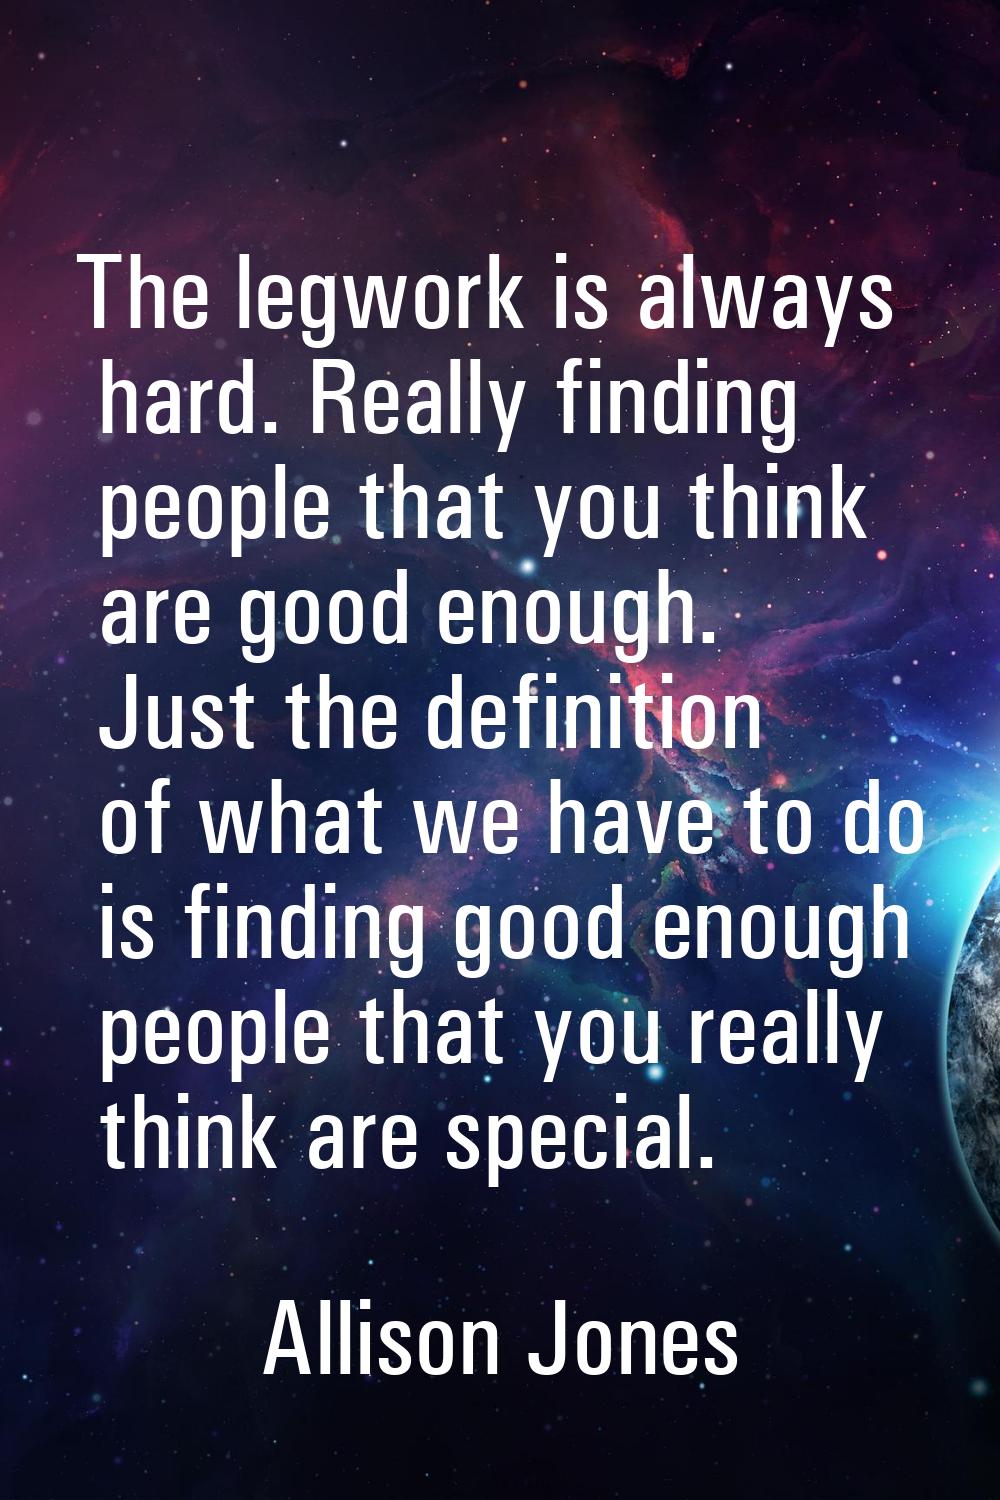 The legwork is always hard. Really finding people that you think are good enough. Just the definiti